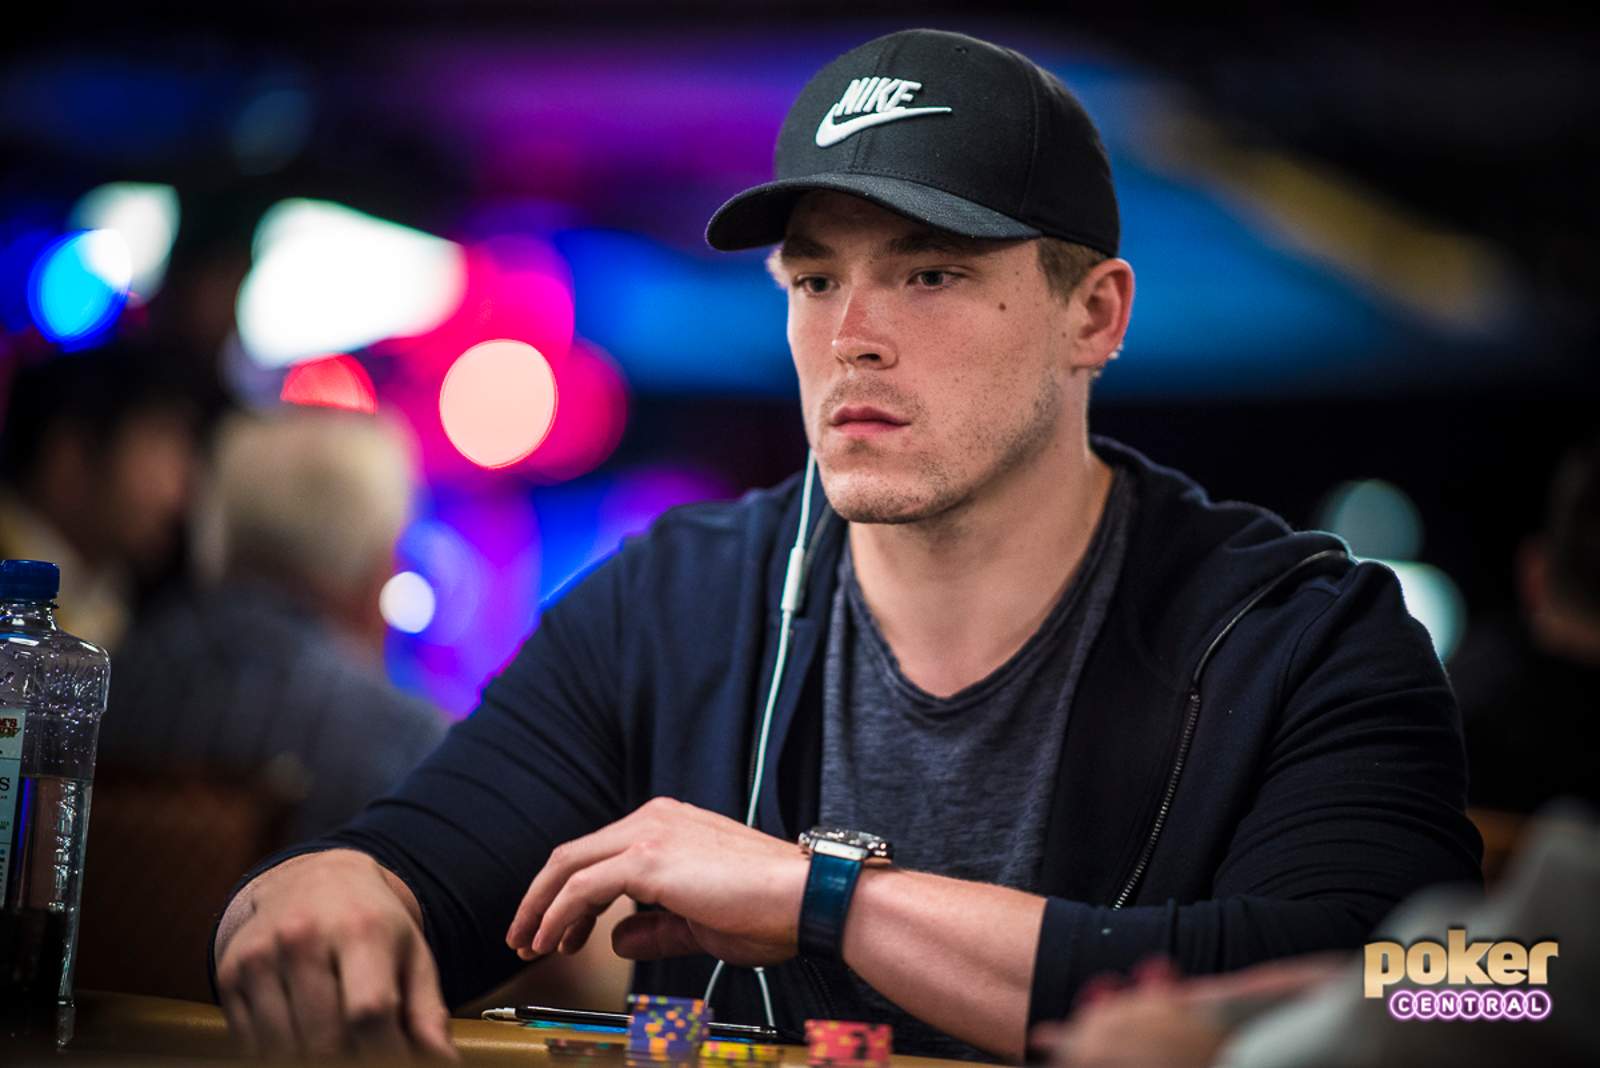 Alex Foxen on Super High Roller Bowl Debut: "This is the Pinnacle"